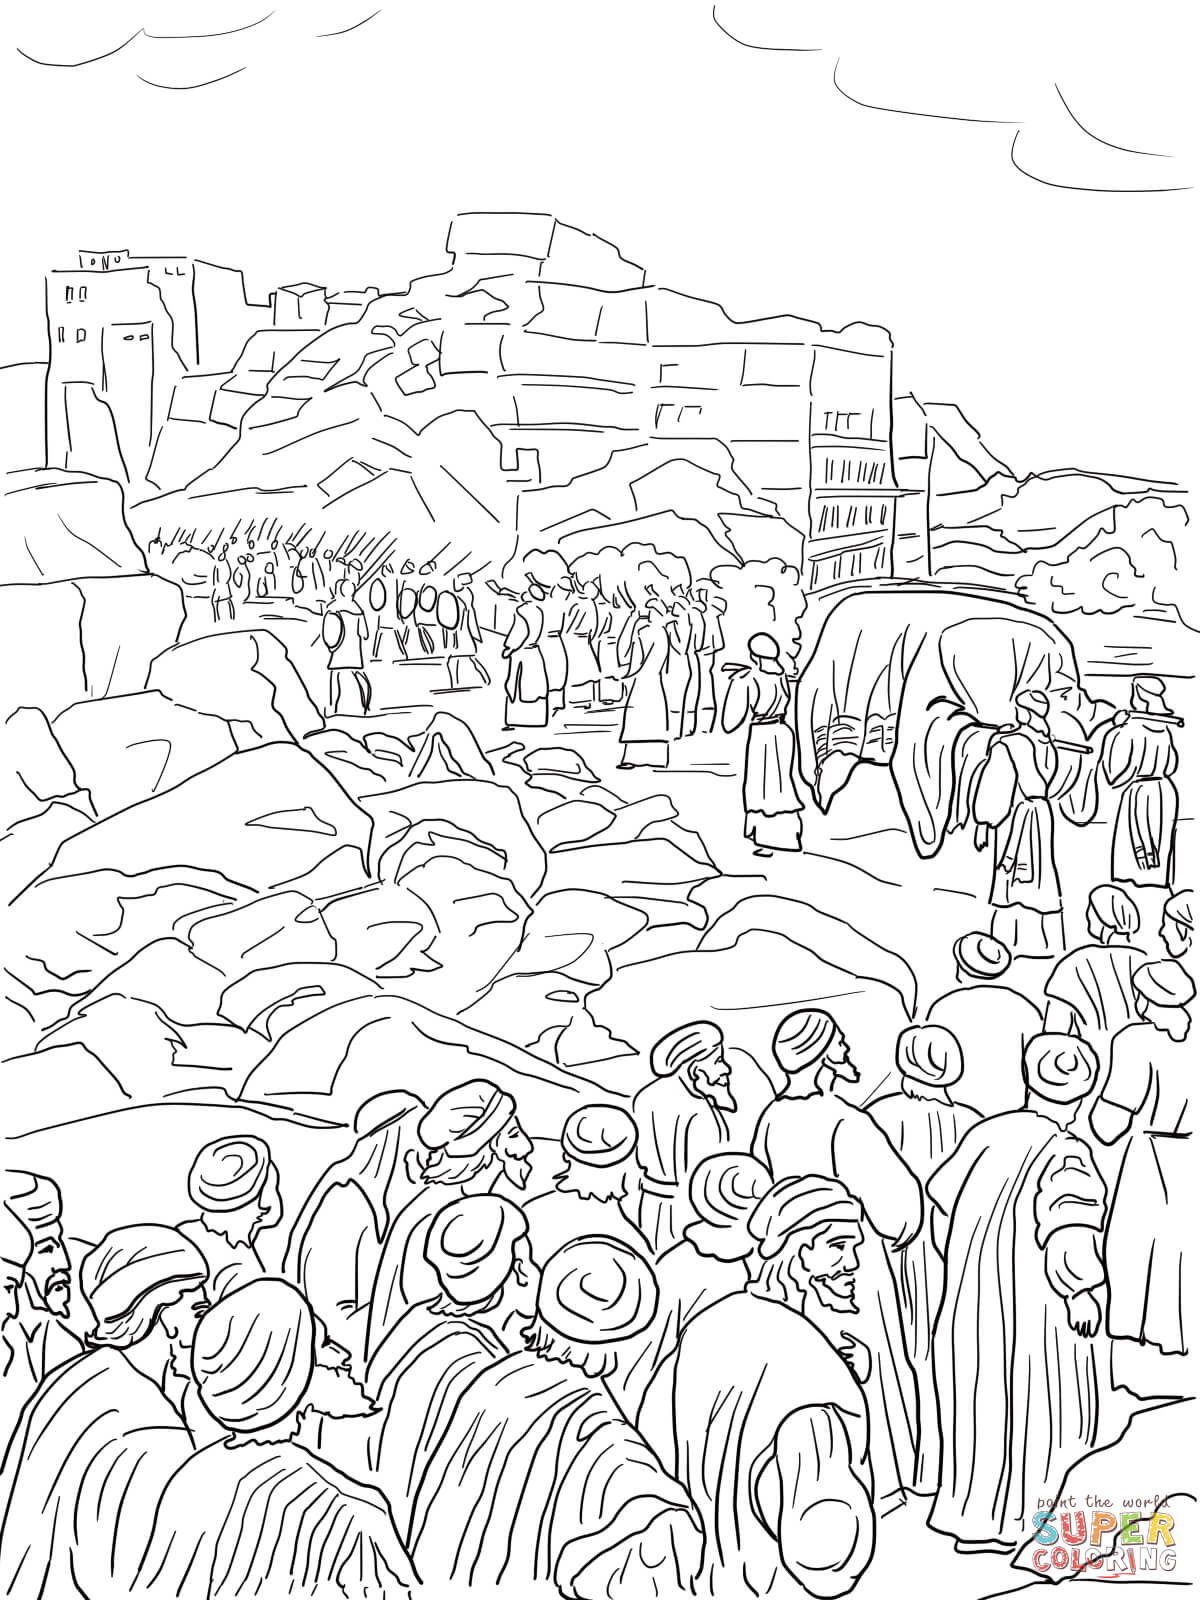 Joshua Capture Of Jericho Coloring Page | Free Printable Coloring